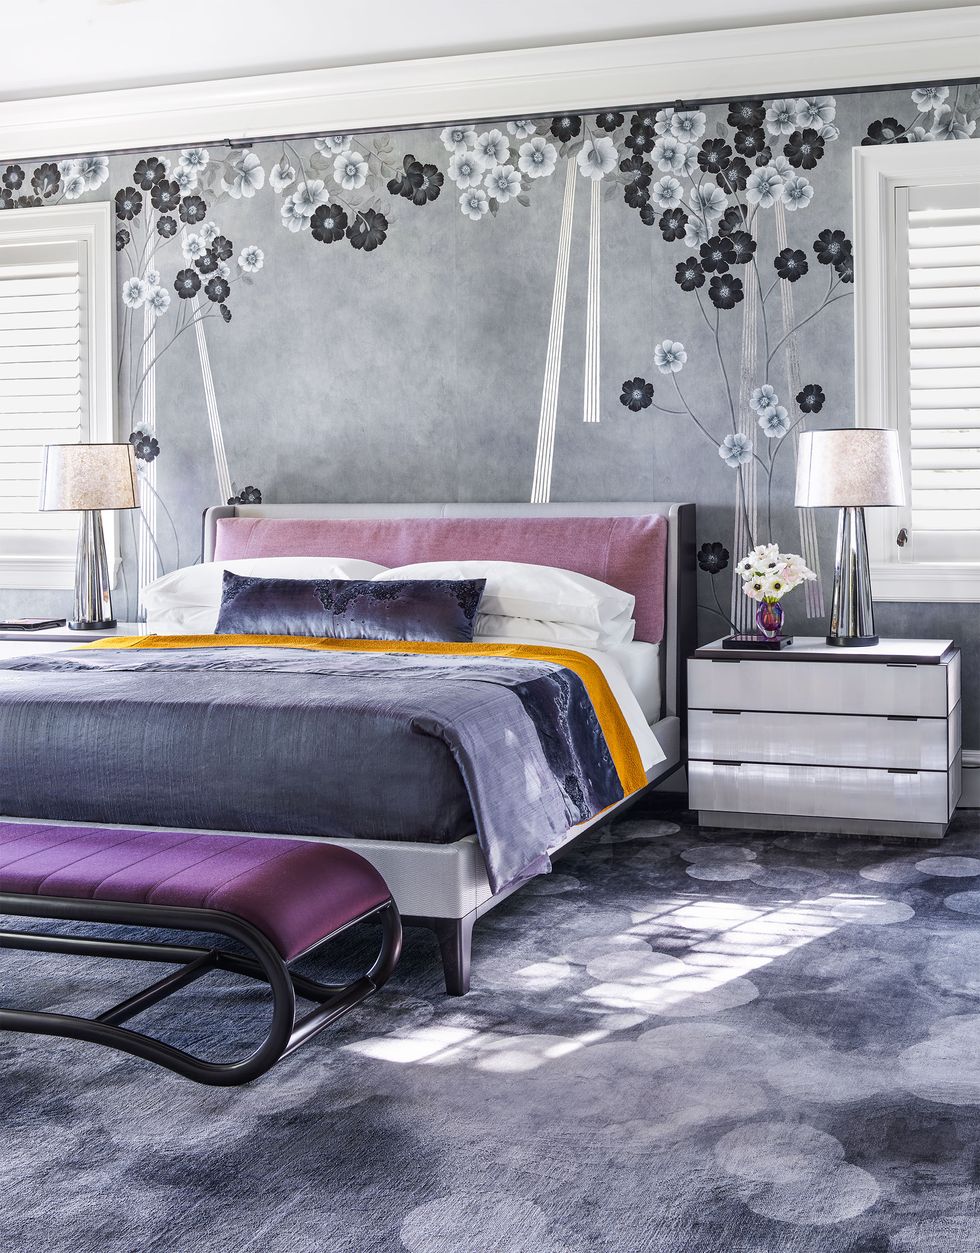 the carpeted primary bedroom has flower pattern wallpaper, a bed with lilac coverlet, two nightstands with lamps, and a metal bench with a plum seat